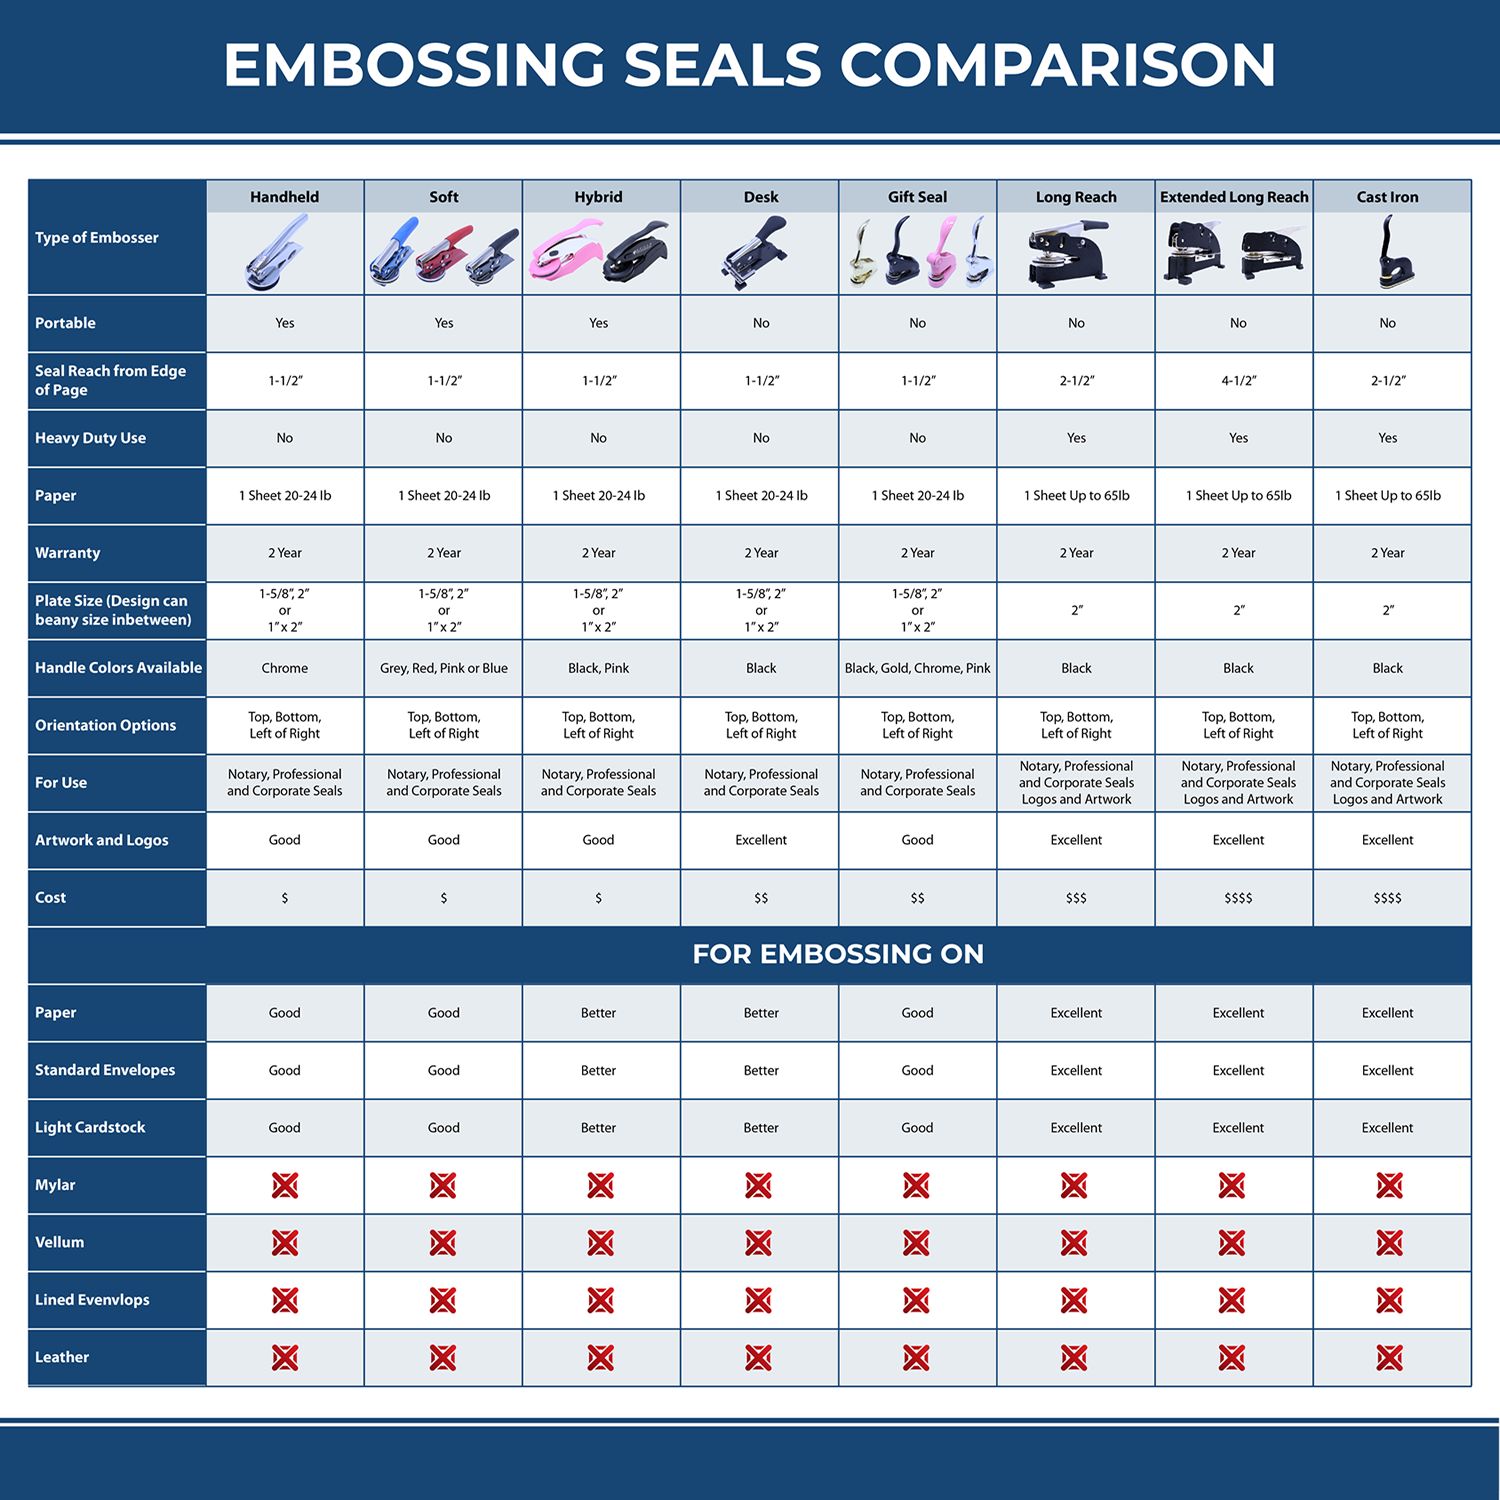 A comparison chart for the different types of mount models available for the Long Reach New York Land Surveyor Seal.